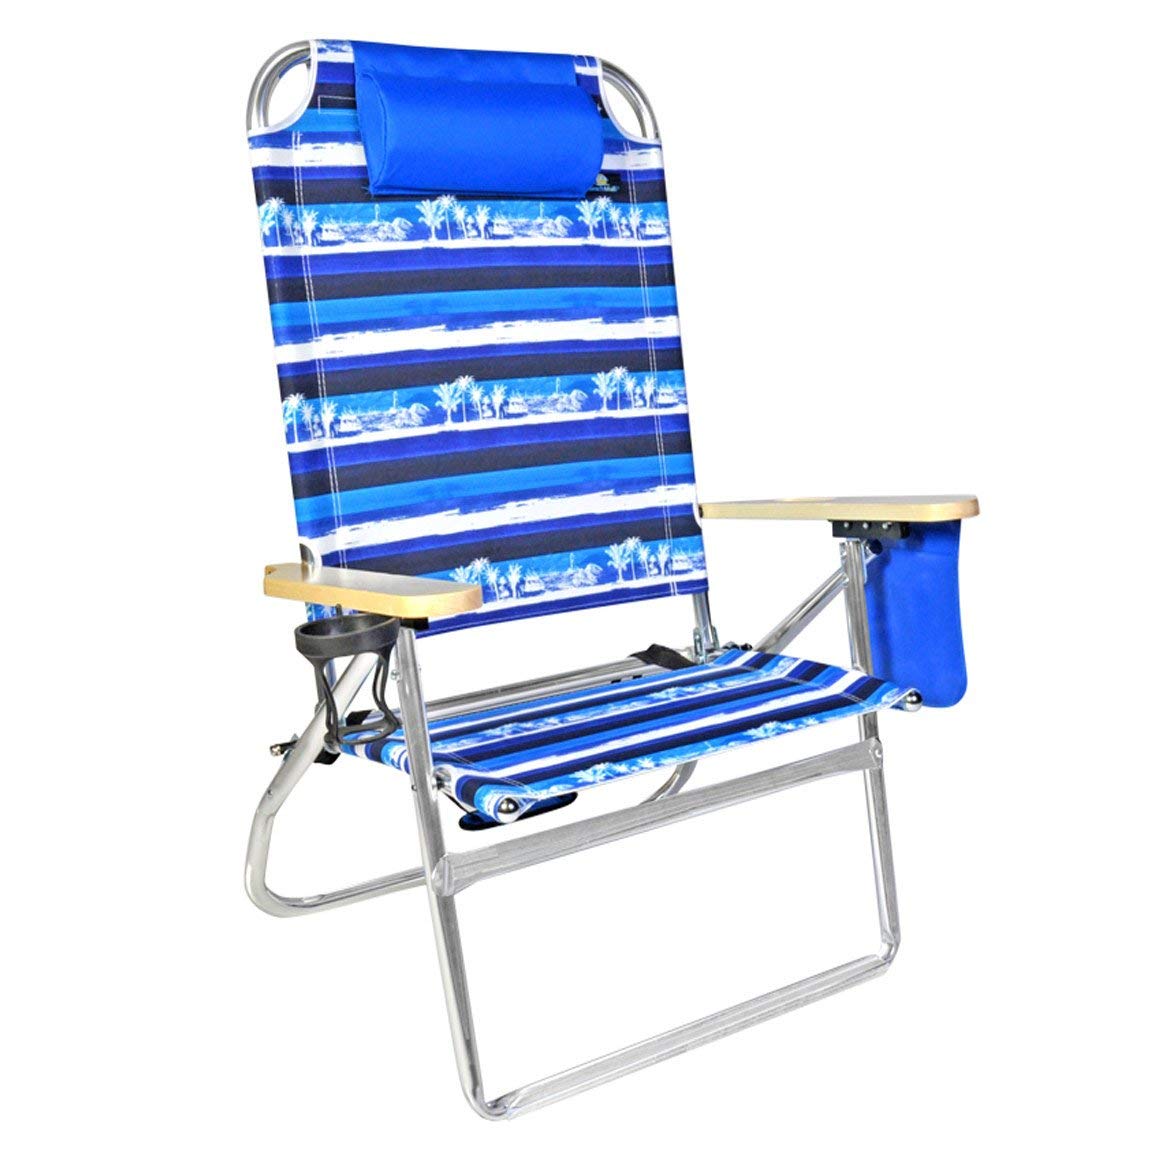 Review of Extra Large - High Seat Heavy Duty 4 Position Beach Chair w/Drink Holder